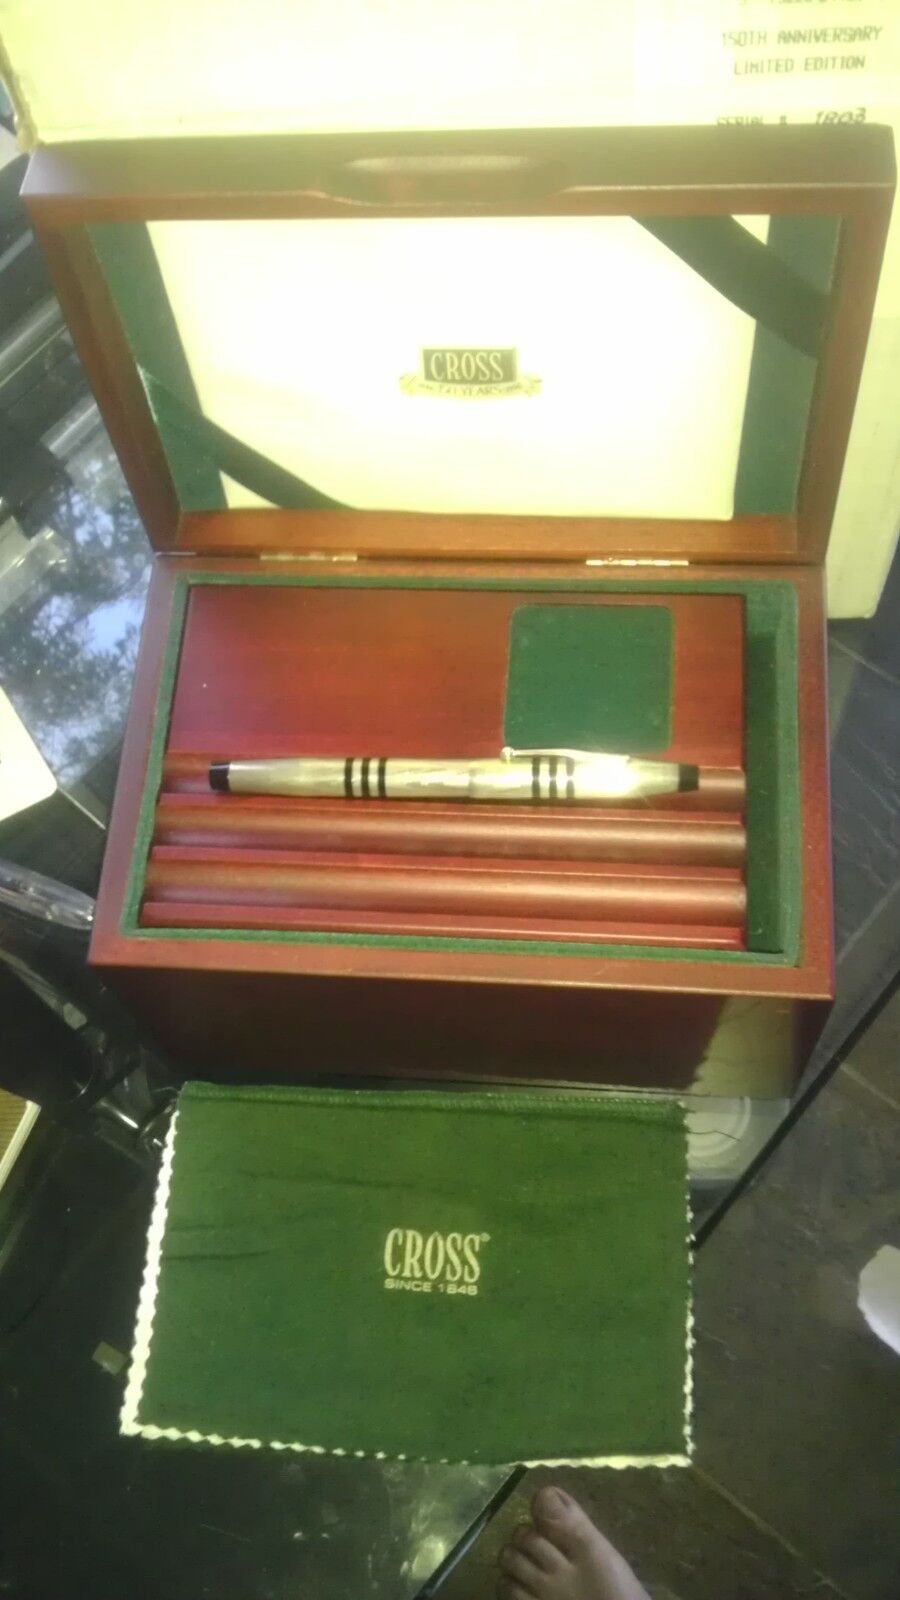 Cross 150th Anniversary Silver Fountain Pen Limited Edition Gold 18K Boxed